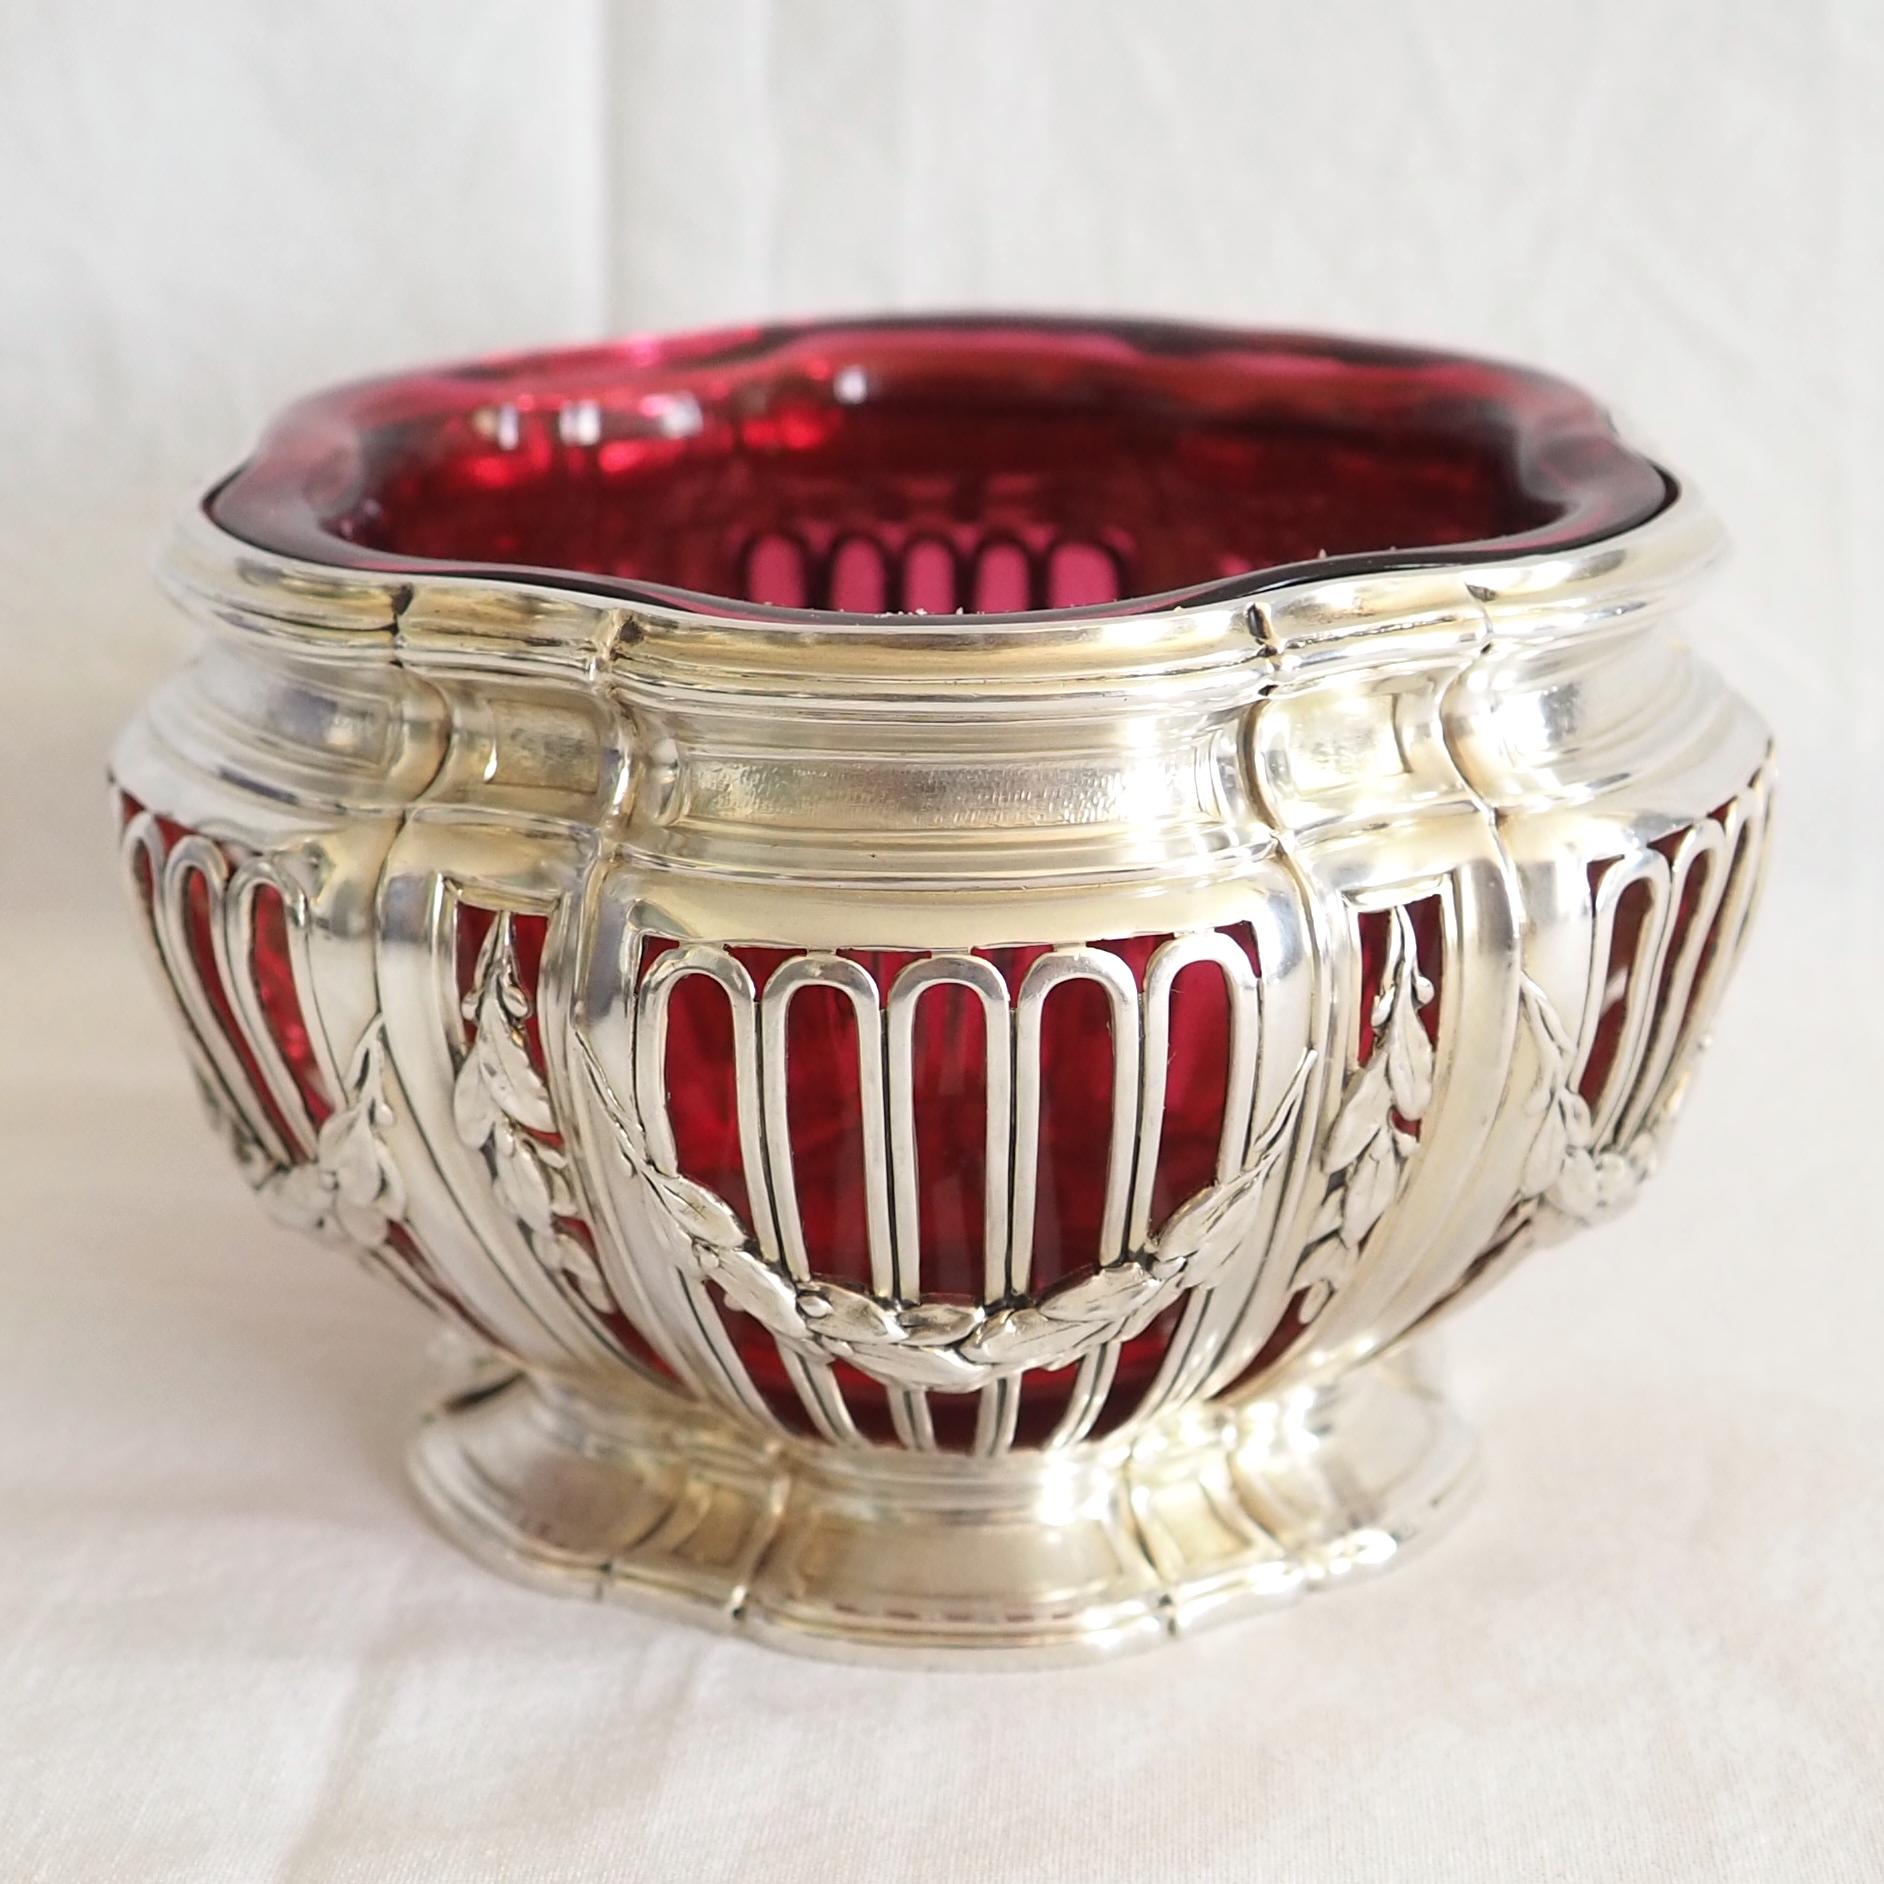 French antique sterling silver and vermeil Louis XVI style bowl or ramekin, and red Baccarat crystal glass inside.

Beautiful, refined production, typical from late 19th century productions, when silver makers delivered perfect copies of 18th